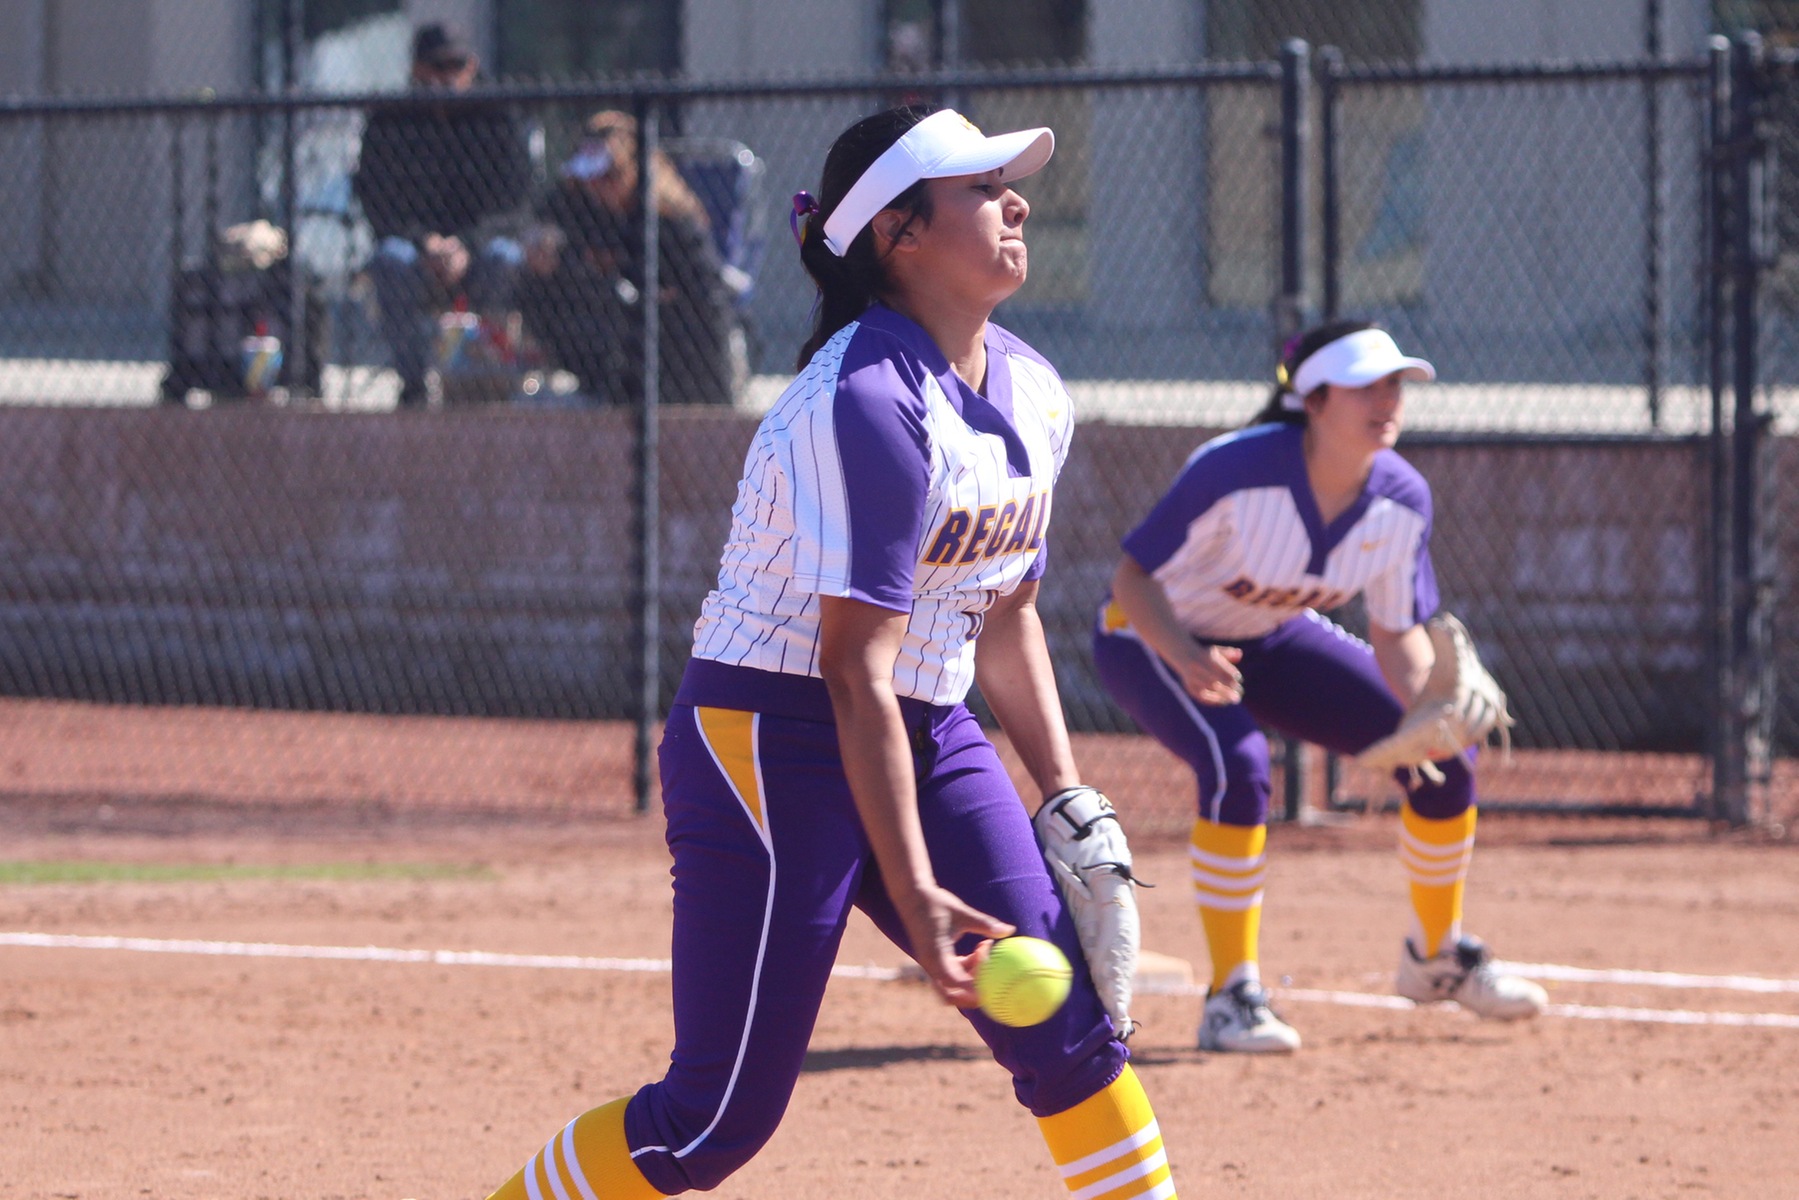 Olivia Serrano pitched the entire second game as the Regals defeated the Tigers 5-4.